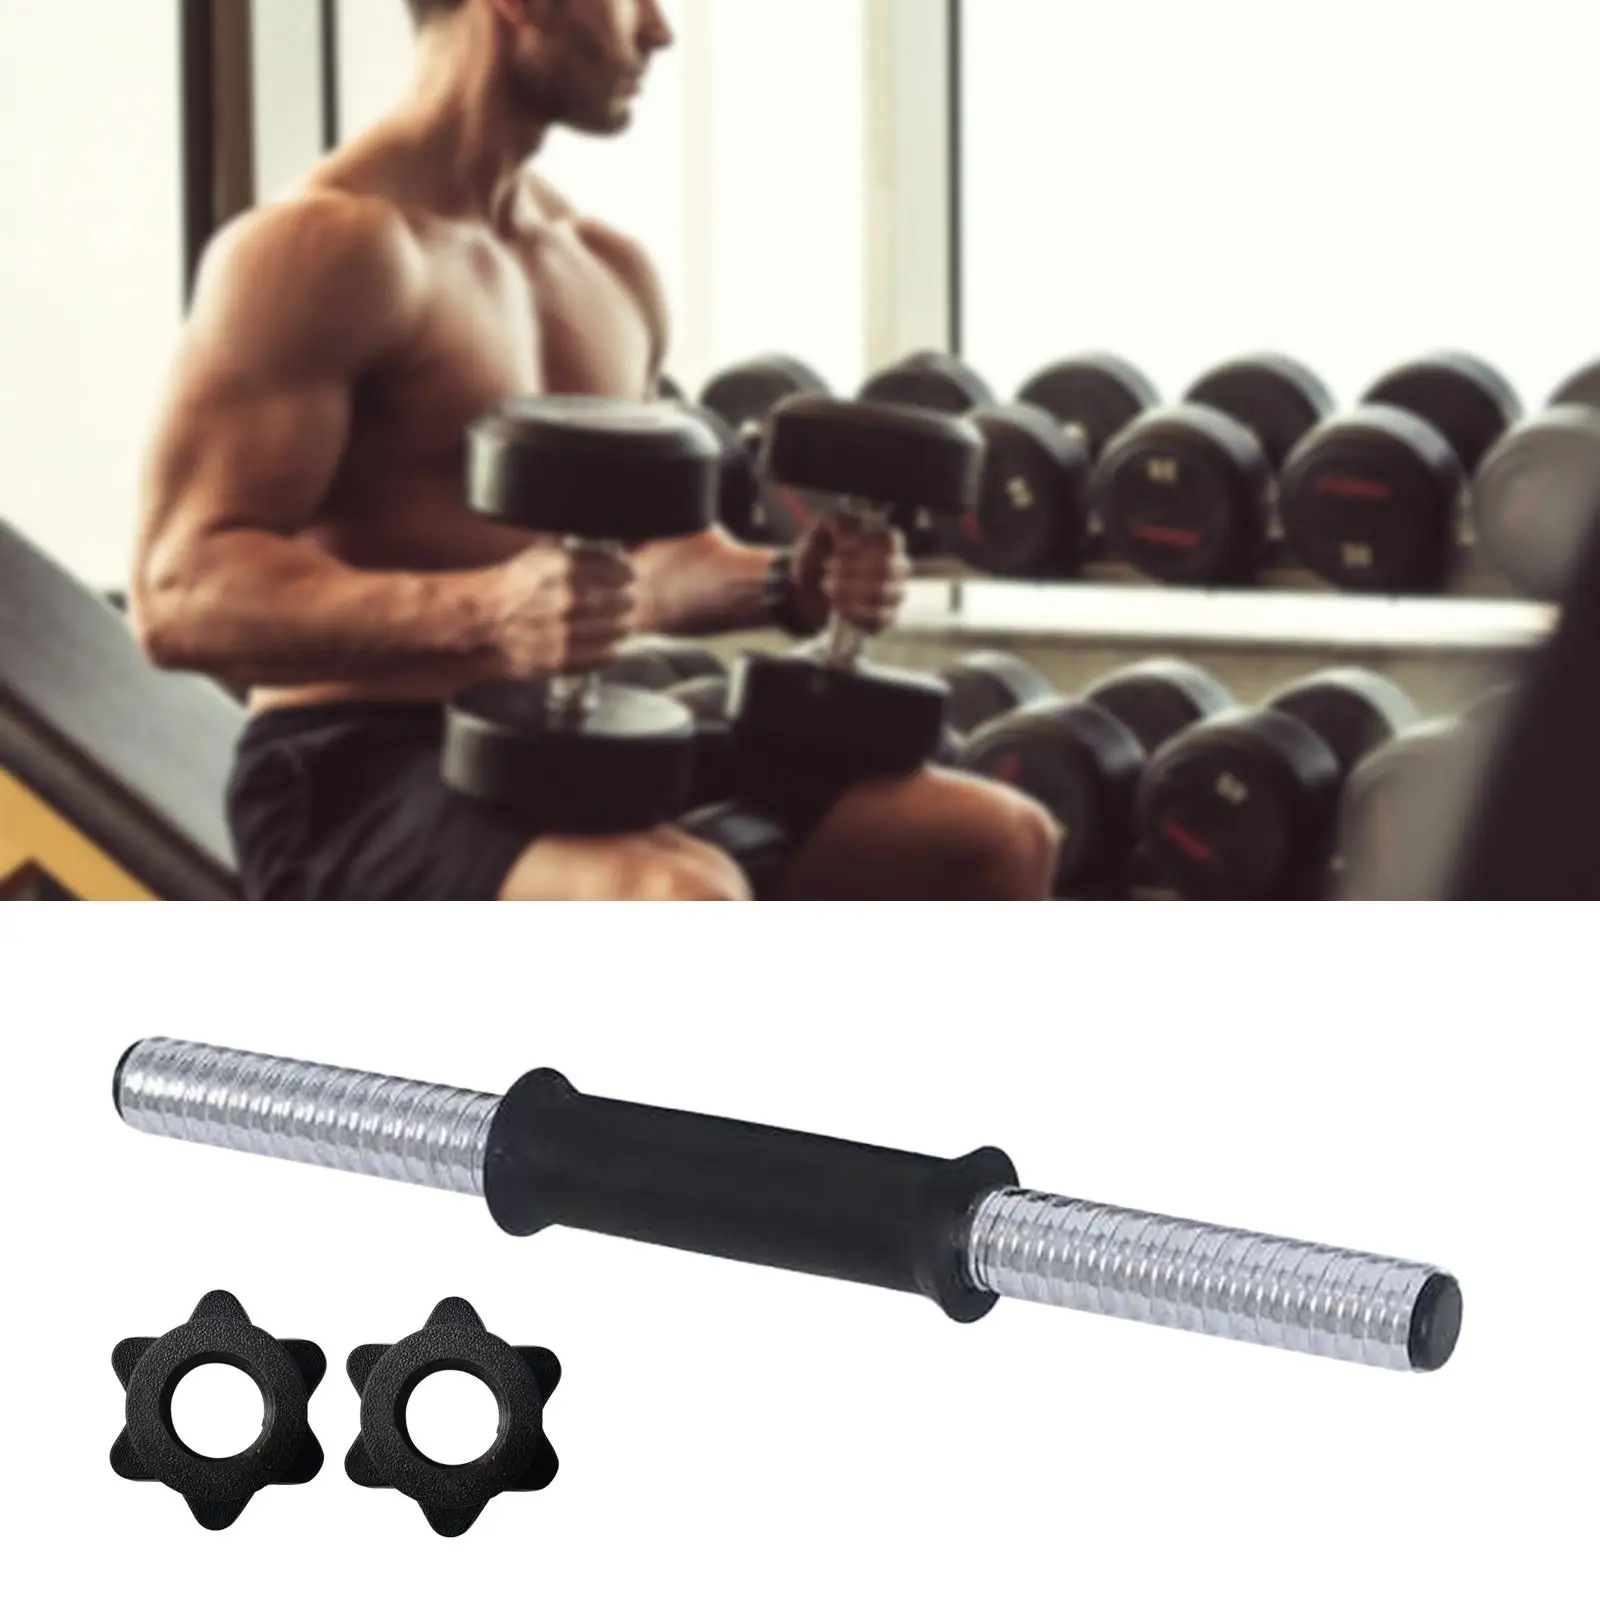 Dumbbell Bar Fitness Equipment Practical Comfort Grip Multifunctional Home Gym for Training Weightlifting Workout Barbells Sport